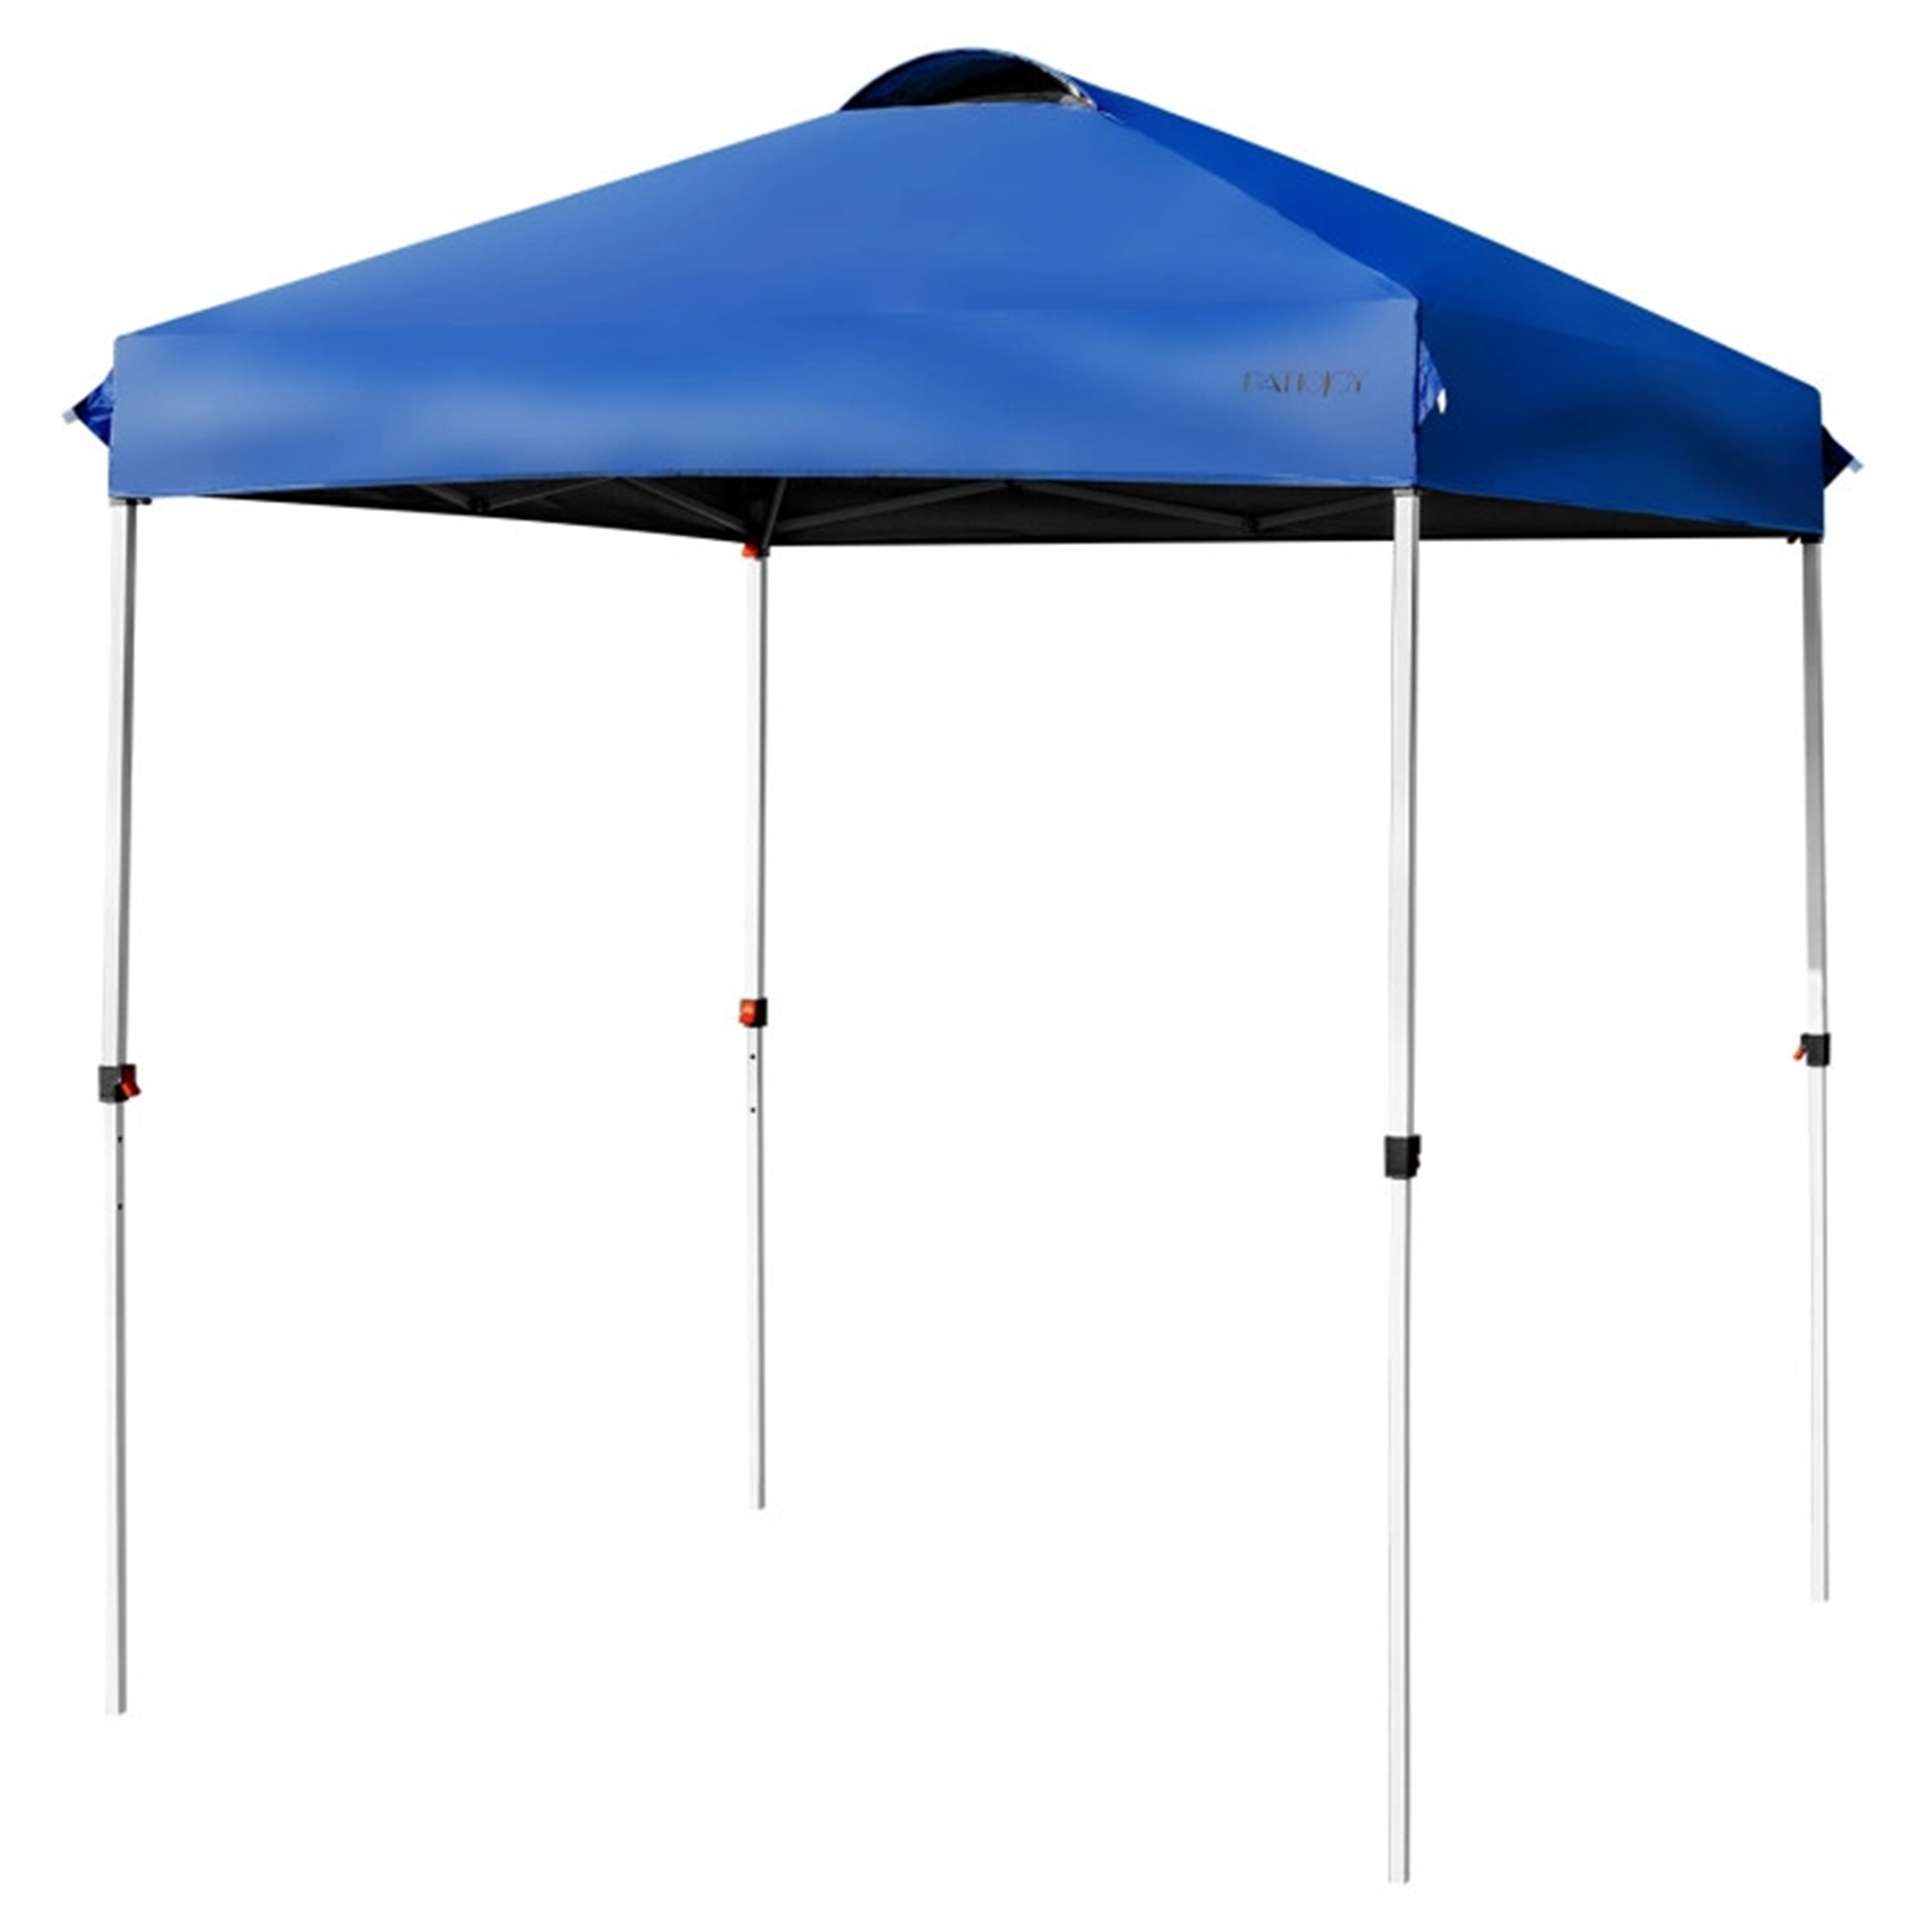 6.6 x 6.6 Feet Outdoor Pop-up Canopy Tent with Roller Bag